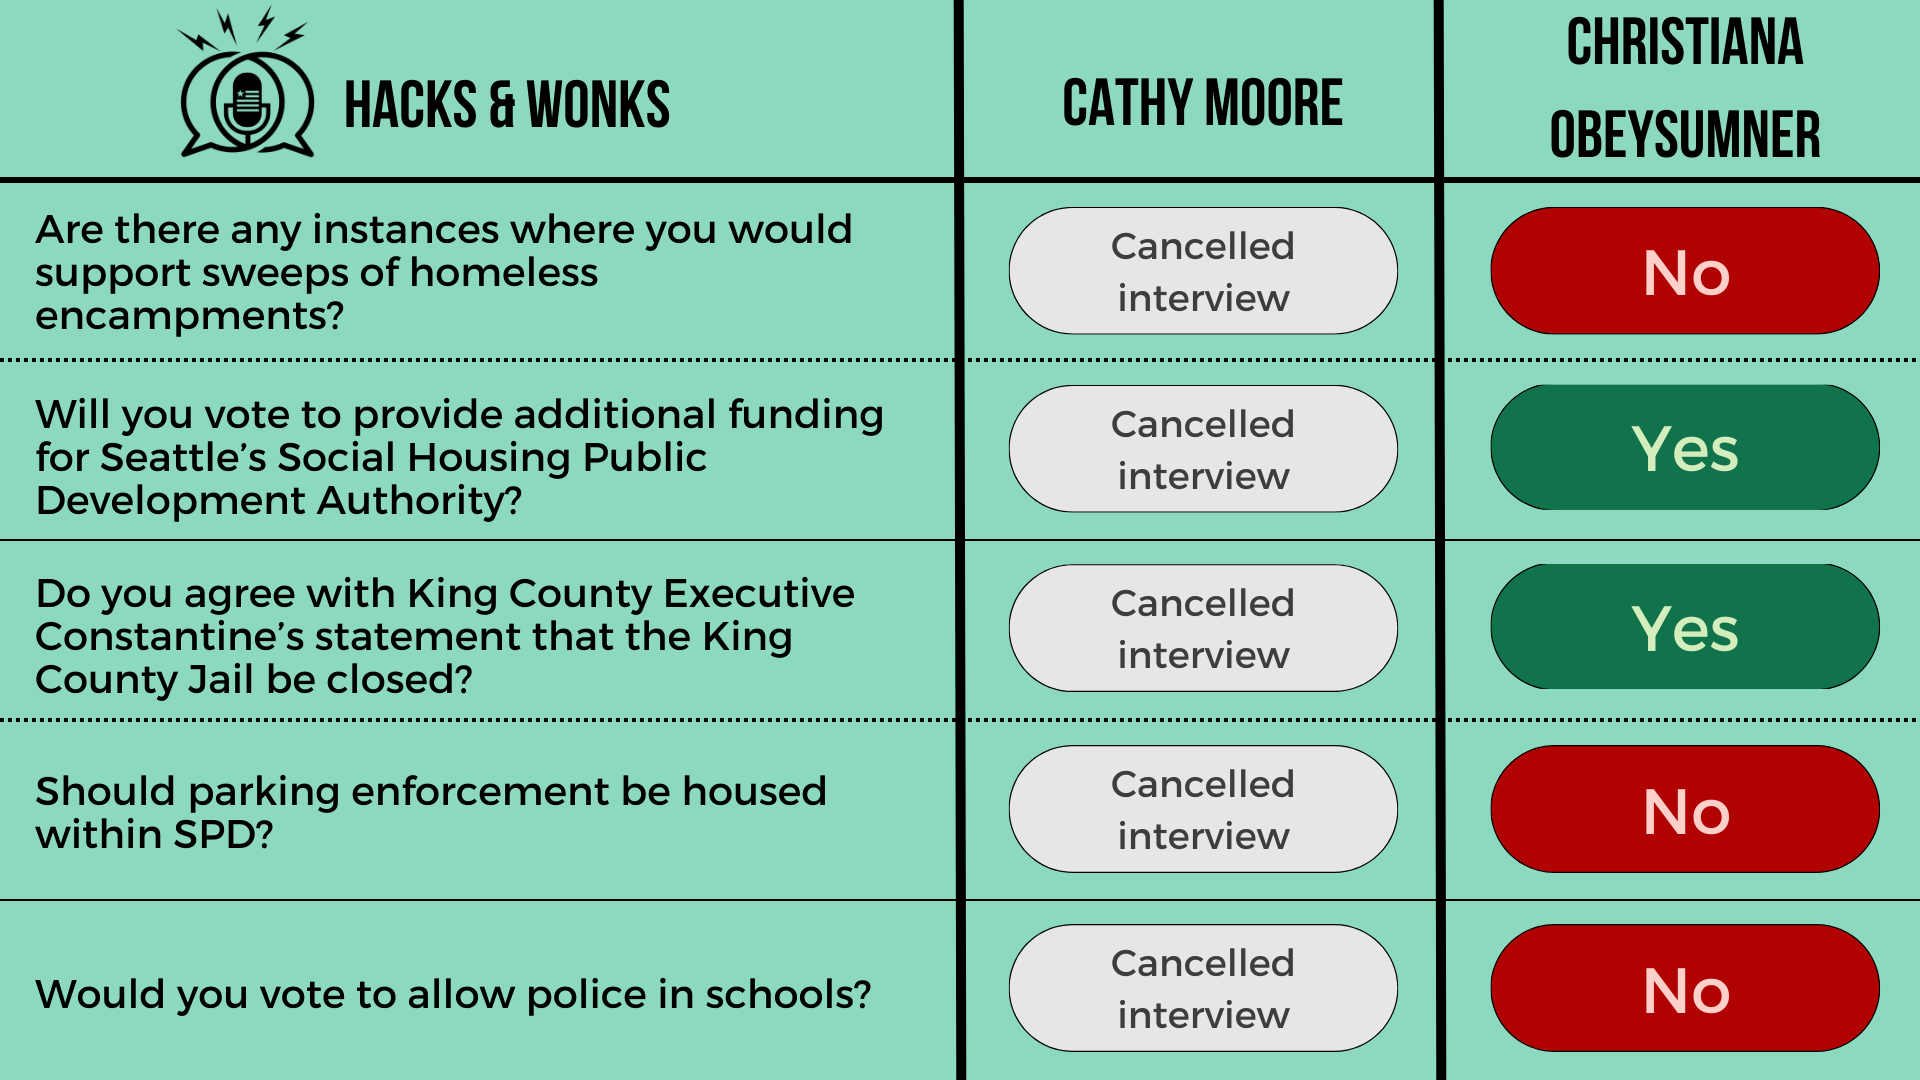 Q: Are there any instances where you would support sweeps of homeless encampments? Cathy Moore: Cancelled interview, ChrisTiana ObeySumner: No  Q: Will you vote to provide additional funding for Seattle’s Social Housing Public Development Authority?